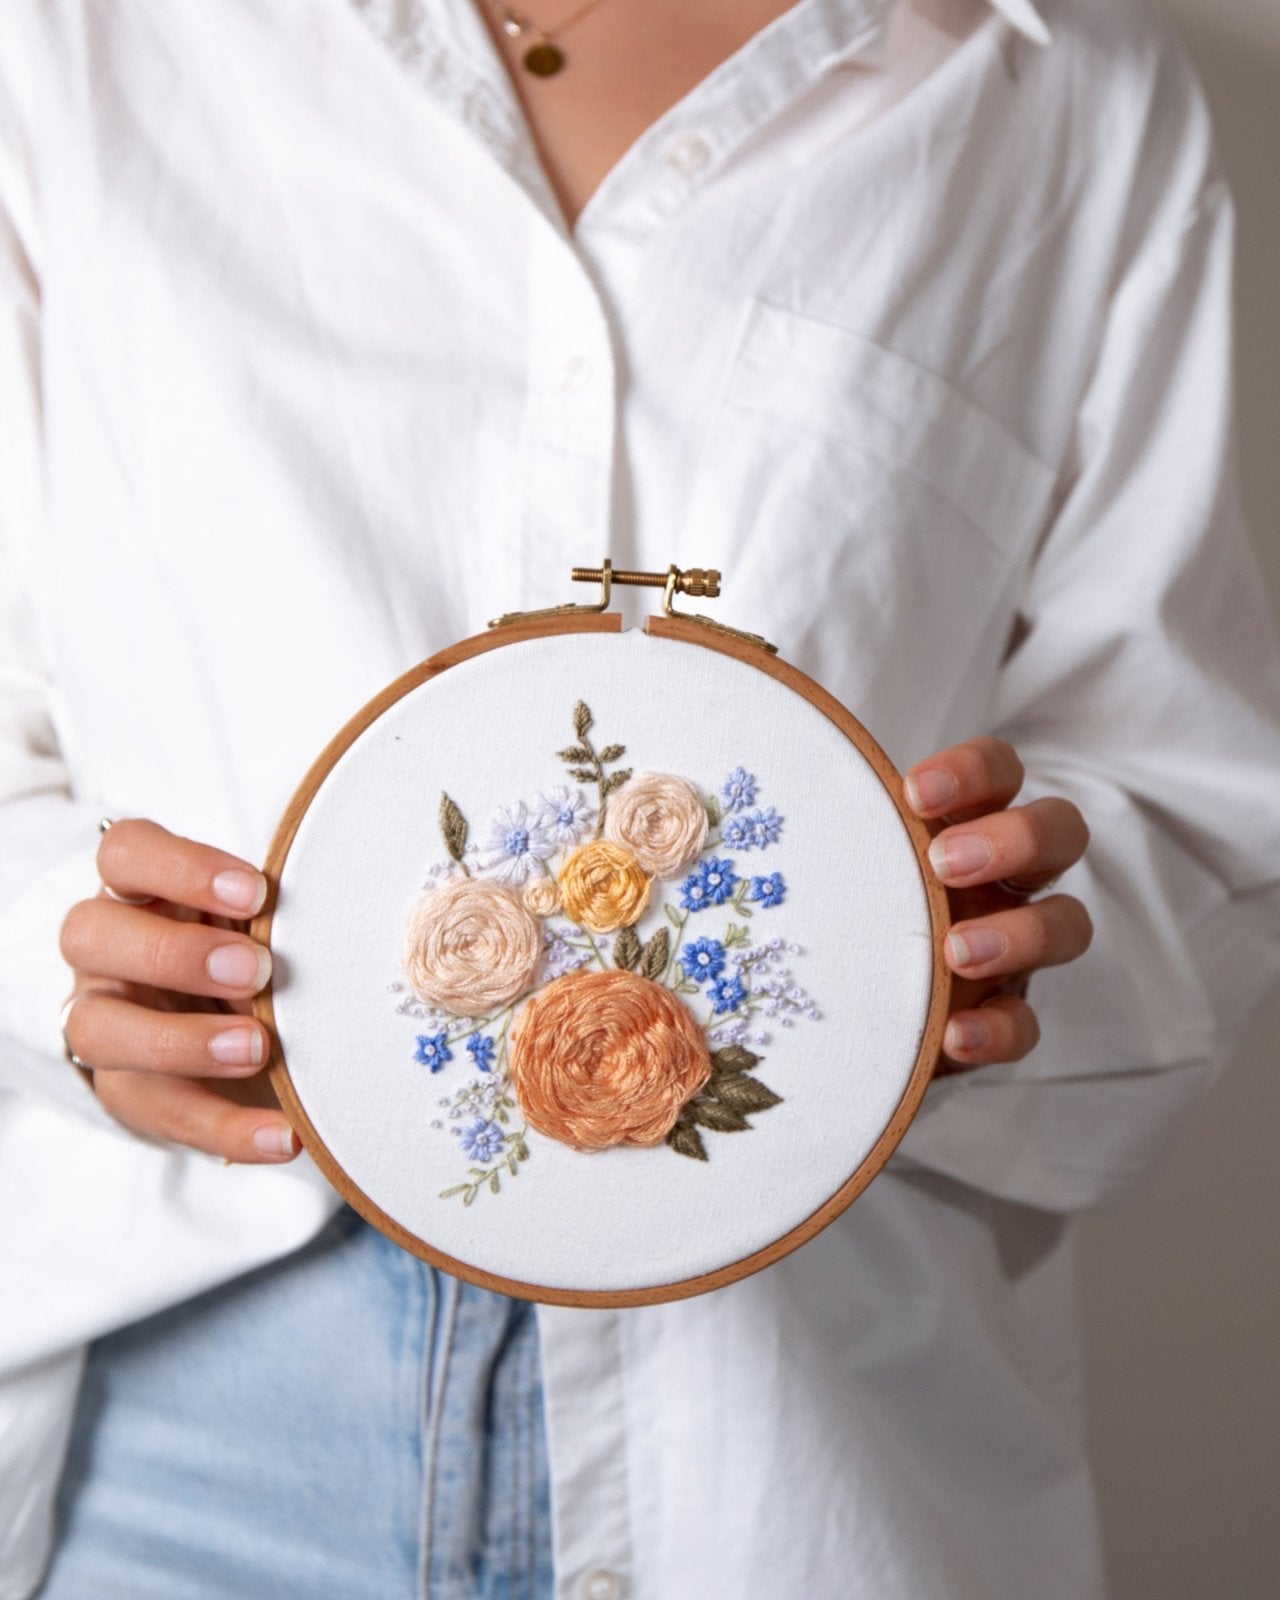 Girl in white shirt and light blue jeans holding completed floral embroidery in a wooden embroidery hoop. The embroidery has pink and blue flowers with a lot of texture in the roses. 